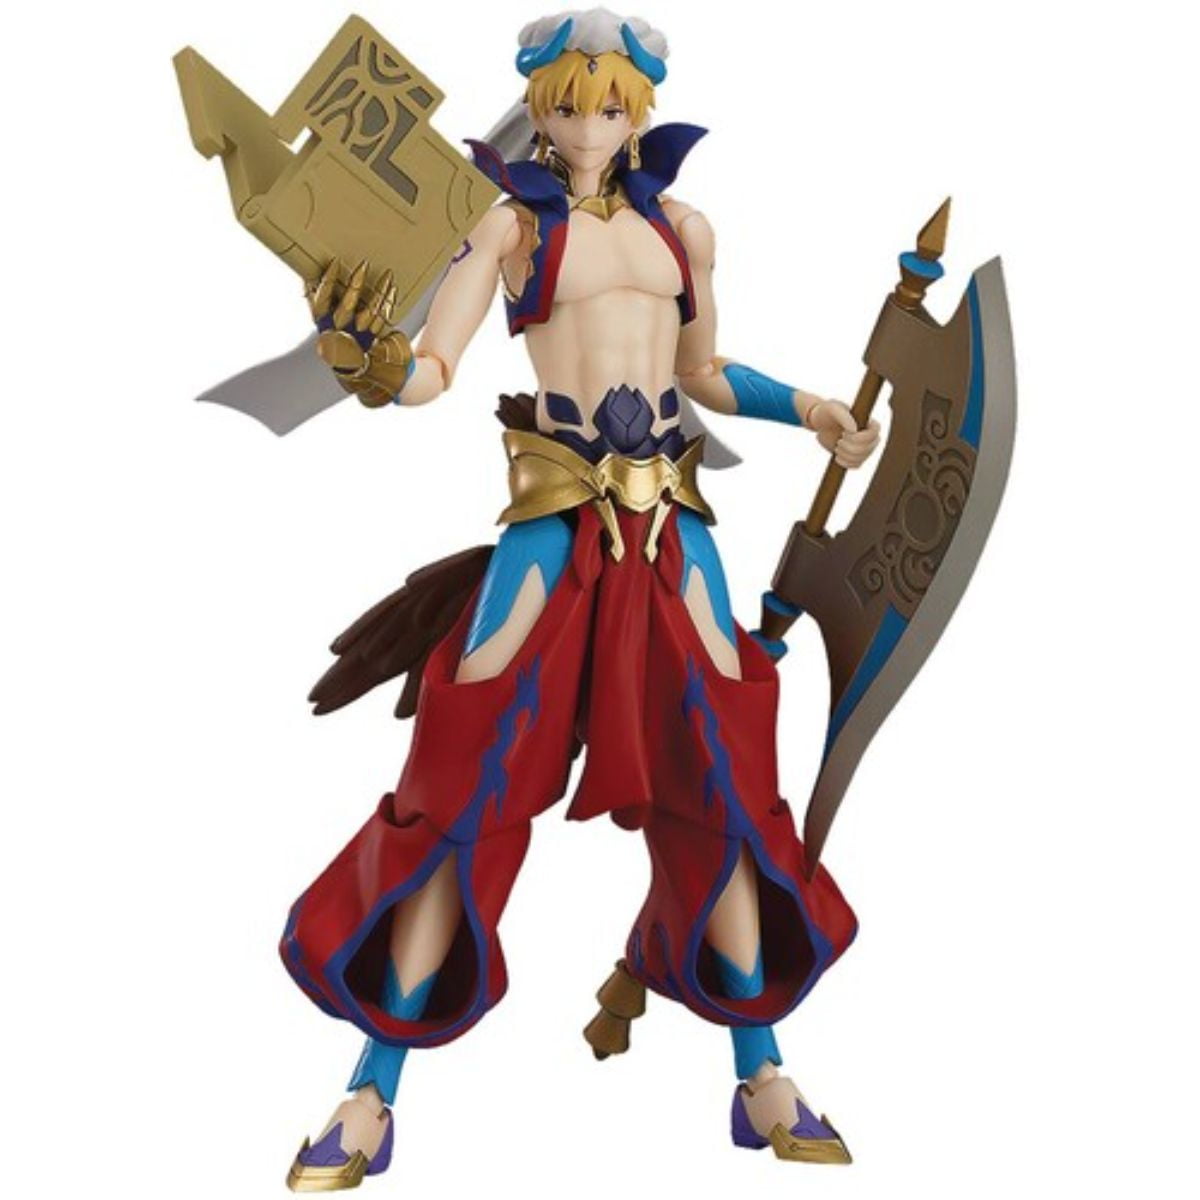 JJWAN Fate/Stay Night FGO Gilgamesh Golden Sparkle GK Anime Figures Statue Model Action Figures Doll Toy Desktop Ornaments Otaku Favorite Anime Fans Collectible Birthday Gifts Boxed